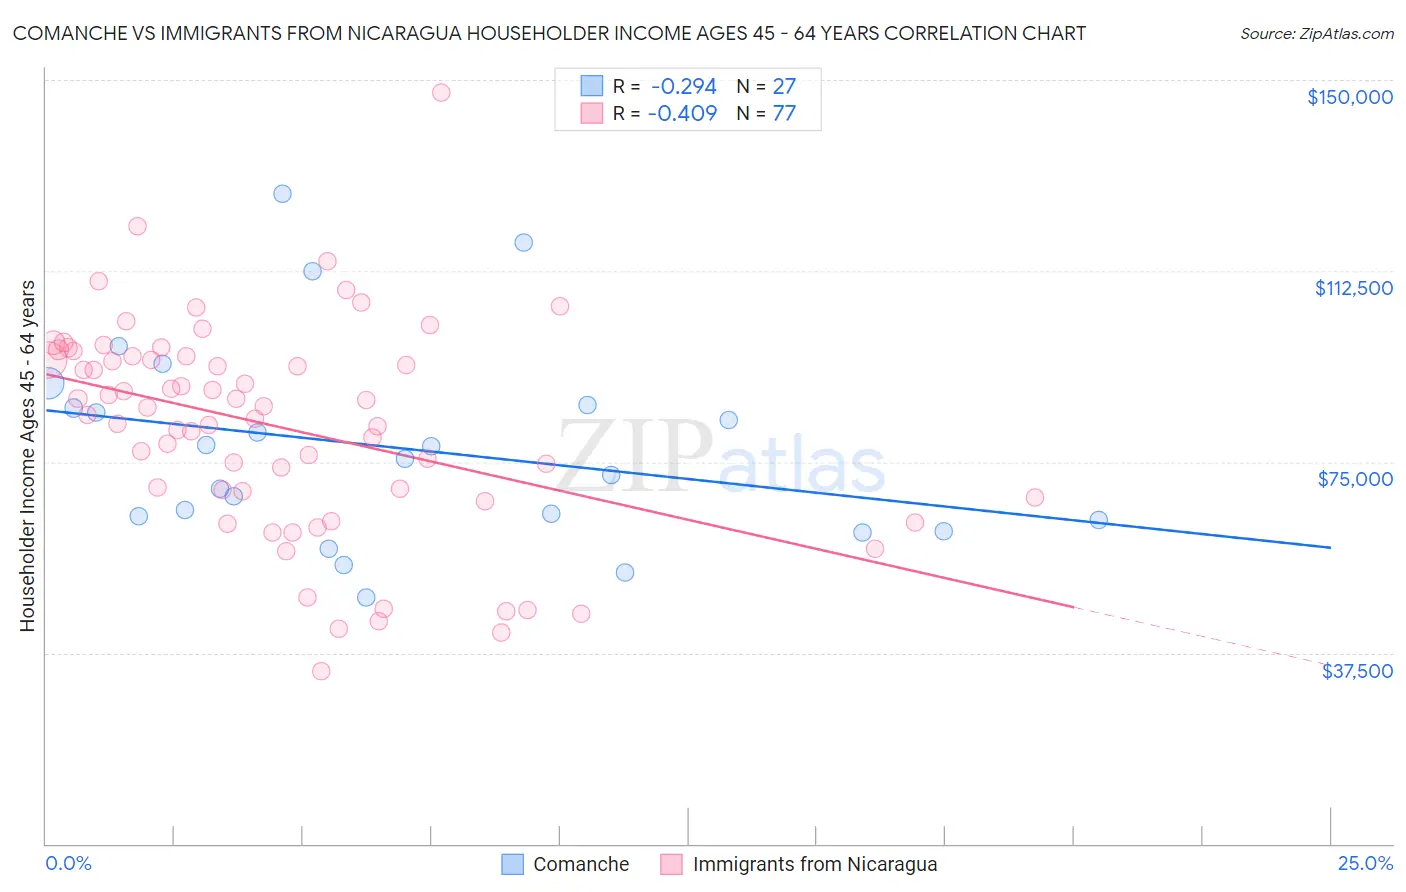 Comanche vs Immigrants from Nicaragua Householder Income Ages 45 - 64 years